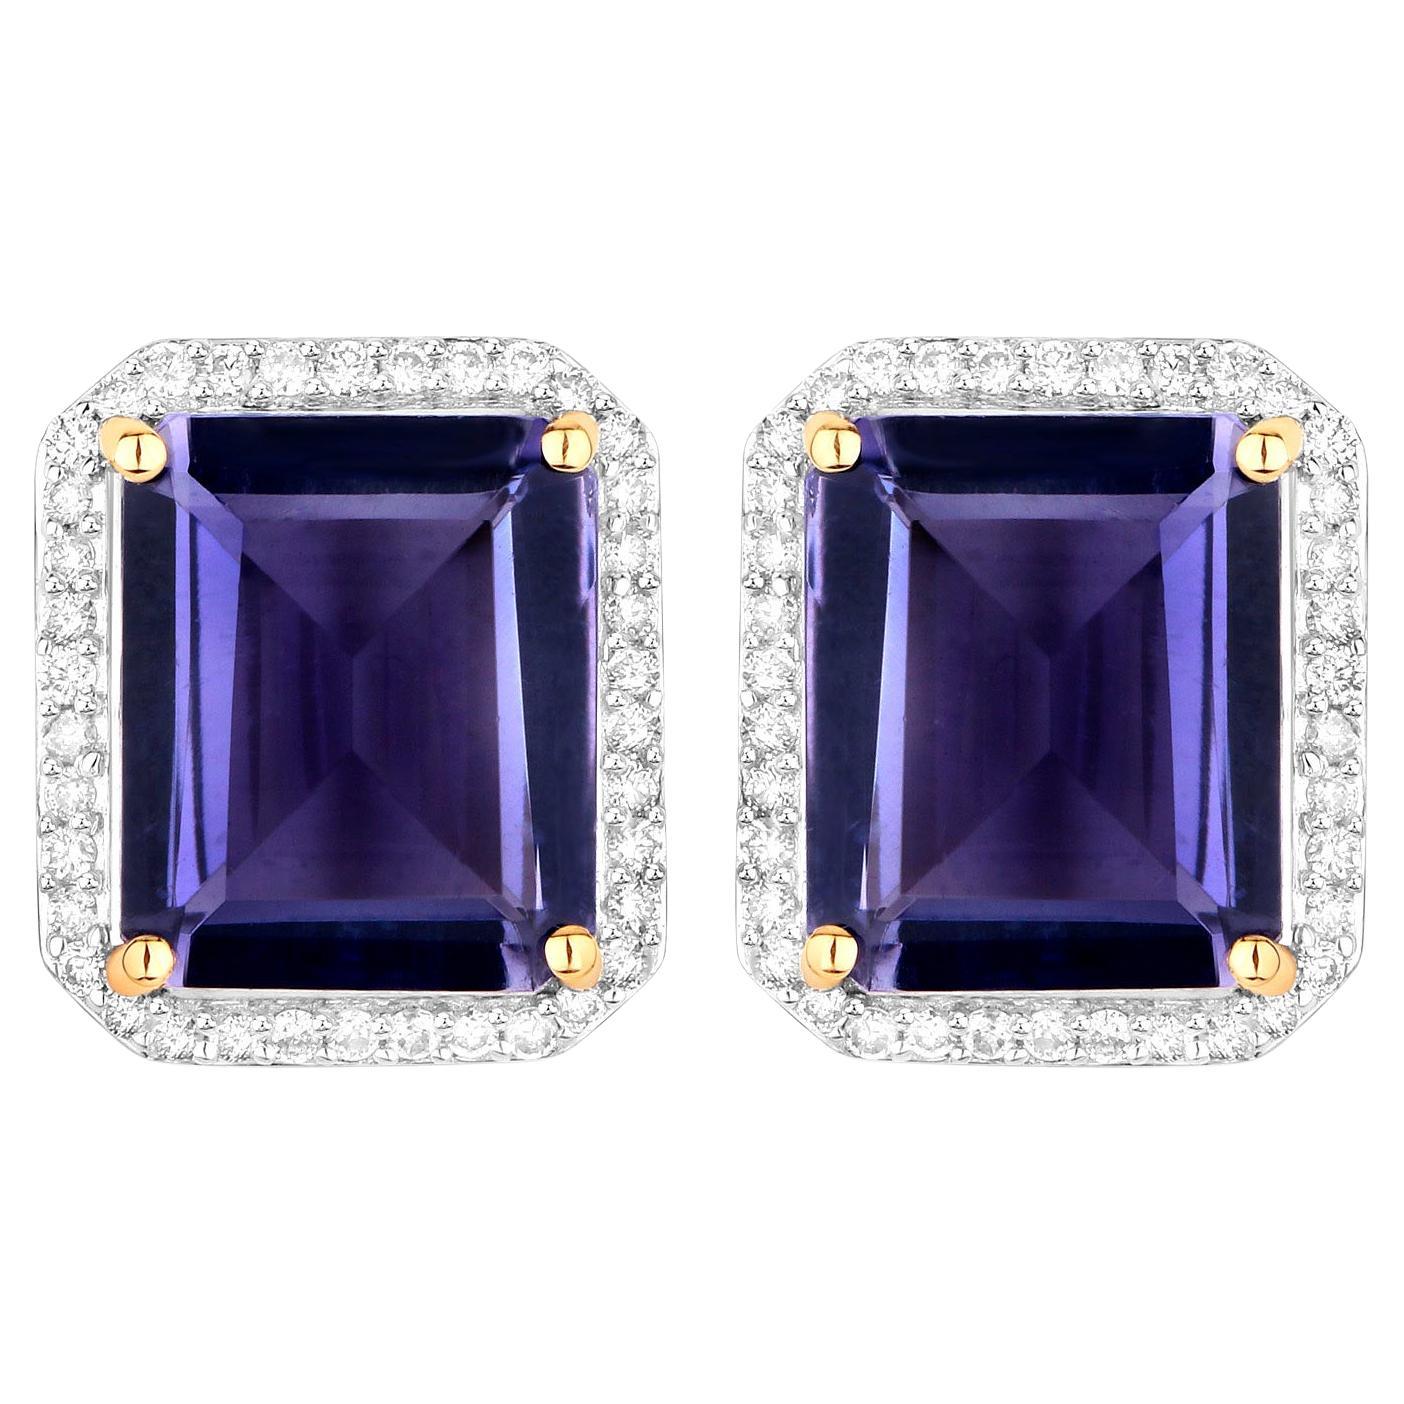 Natural Iolite Stud Earrings Diamond Halo 7.2 Carats 14K Gold For Sale